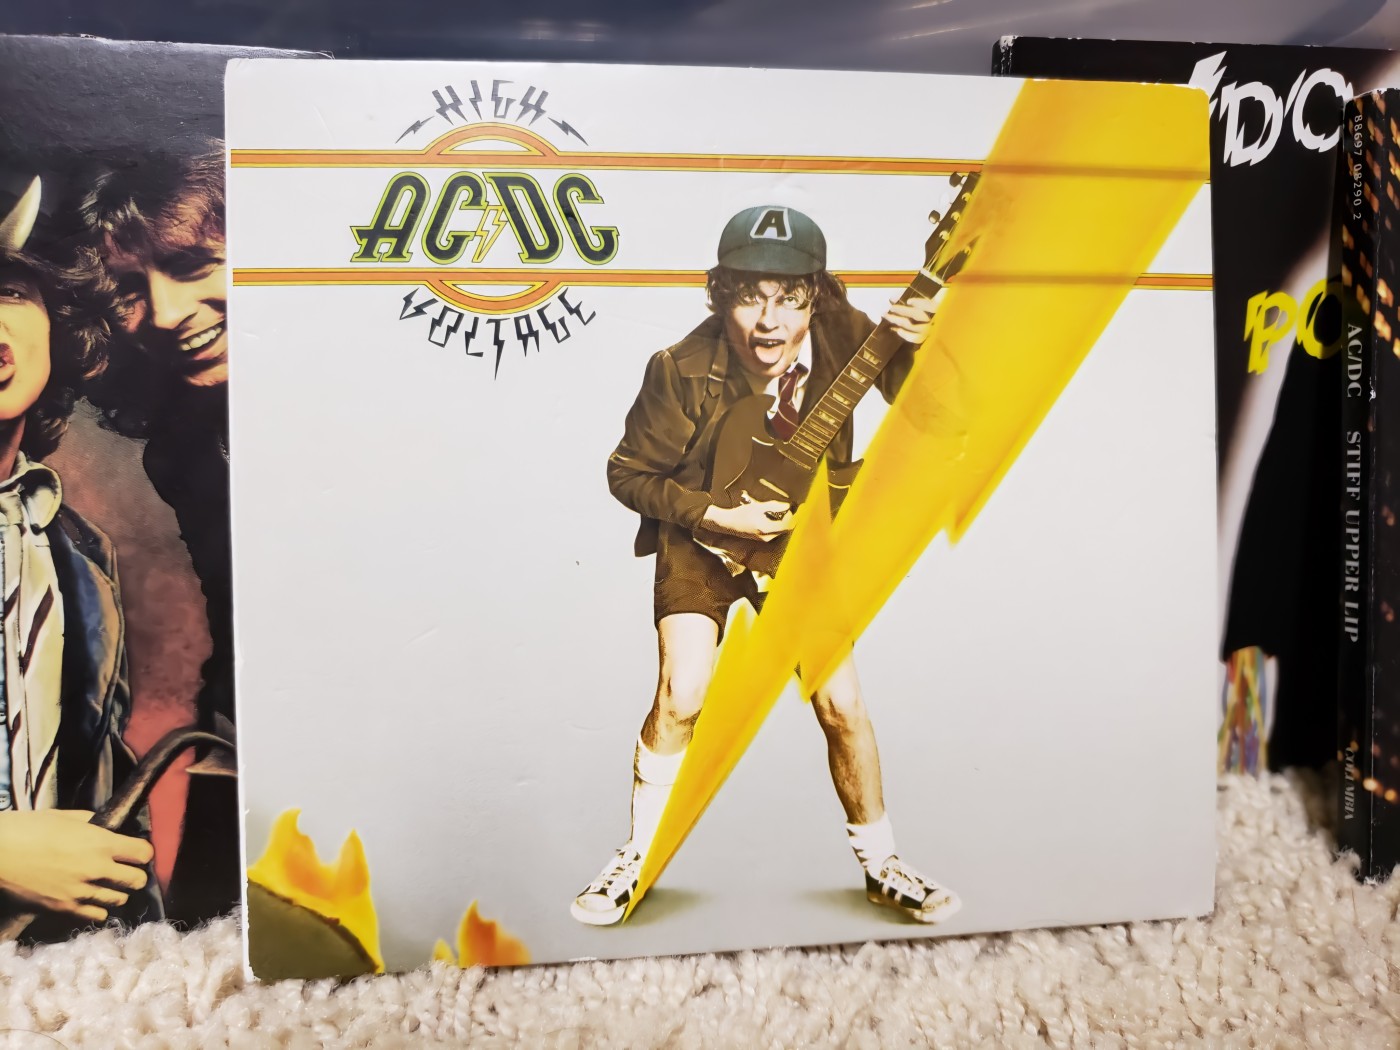 AC/DC's 'High Voltage' is the Best Purchase I Ever Made! | Review – Lana Teramae Me, Myself Time